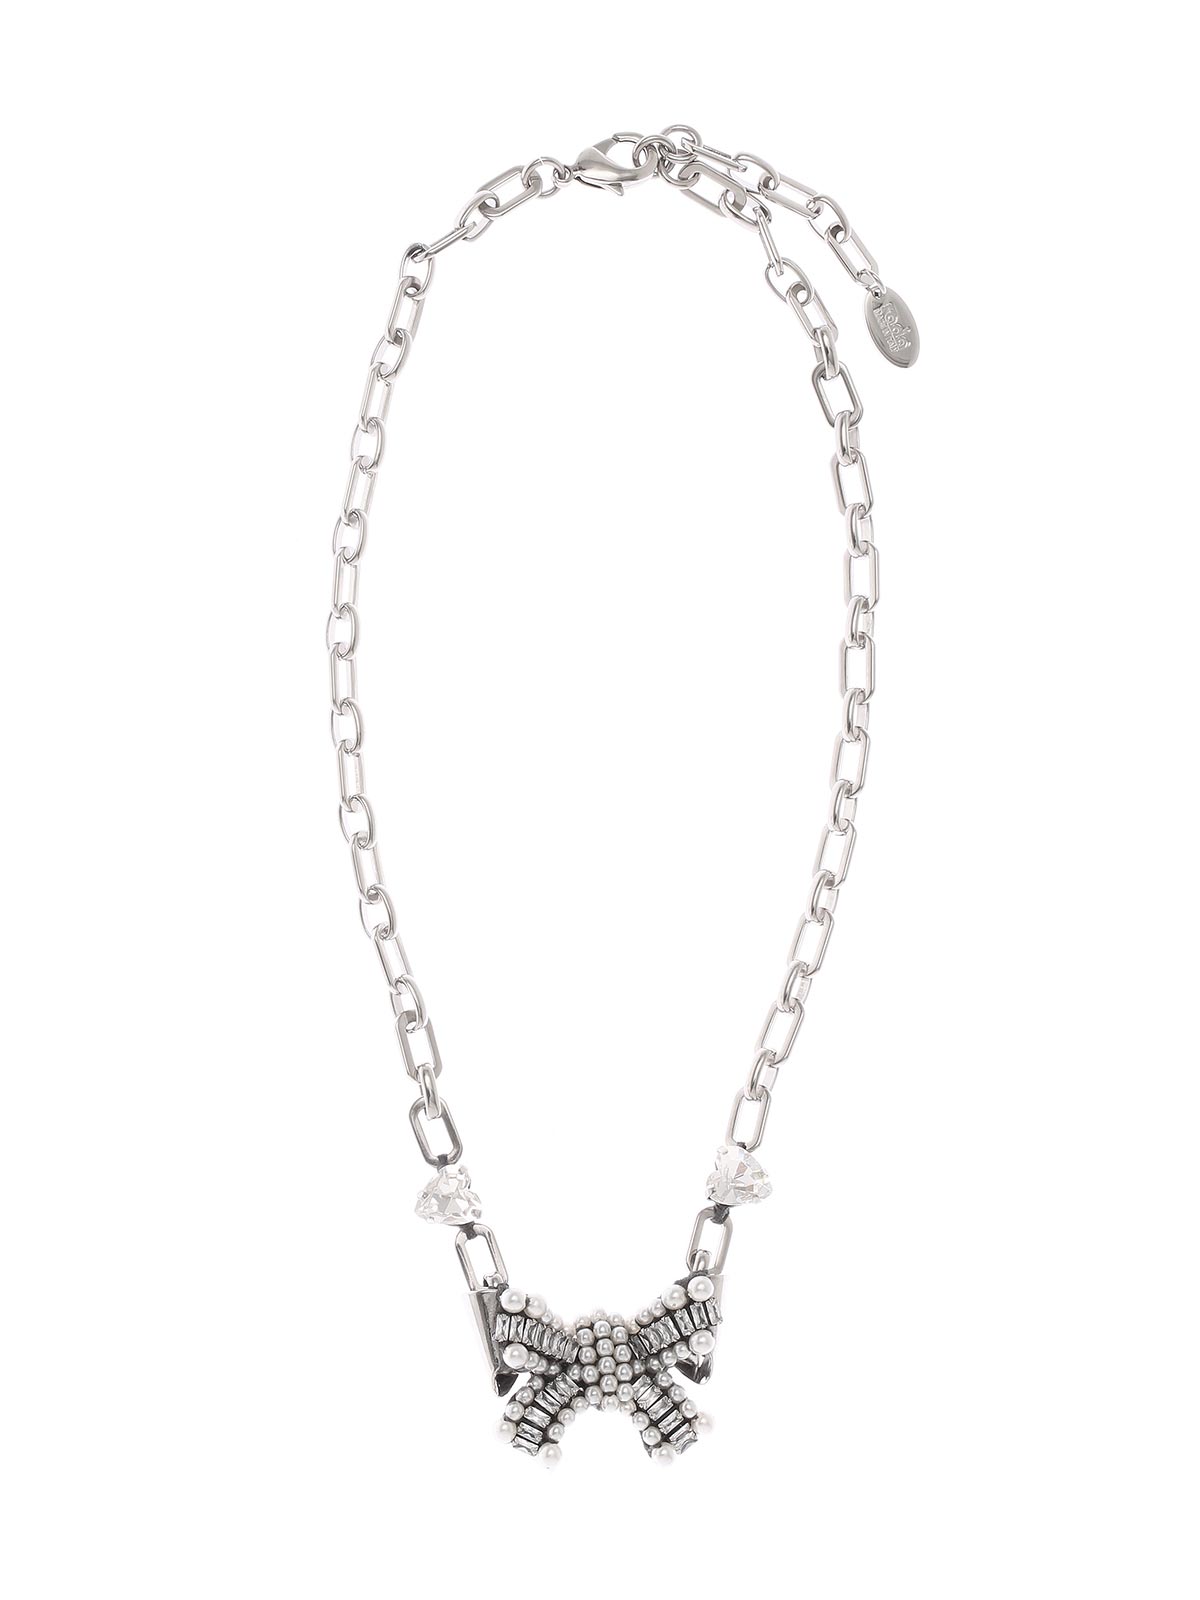  Chain necklace with crystal and beads bow pendant